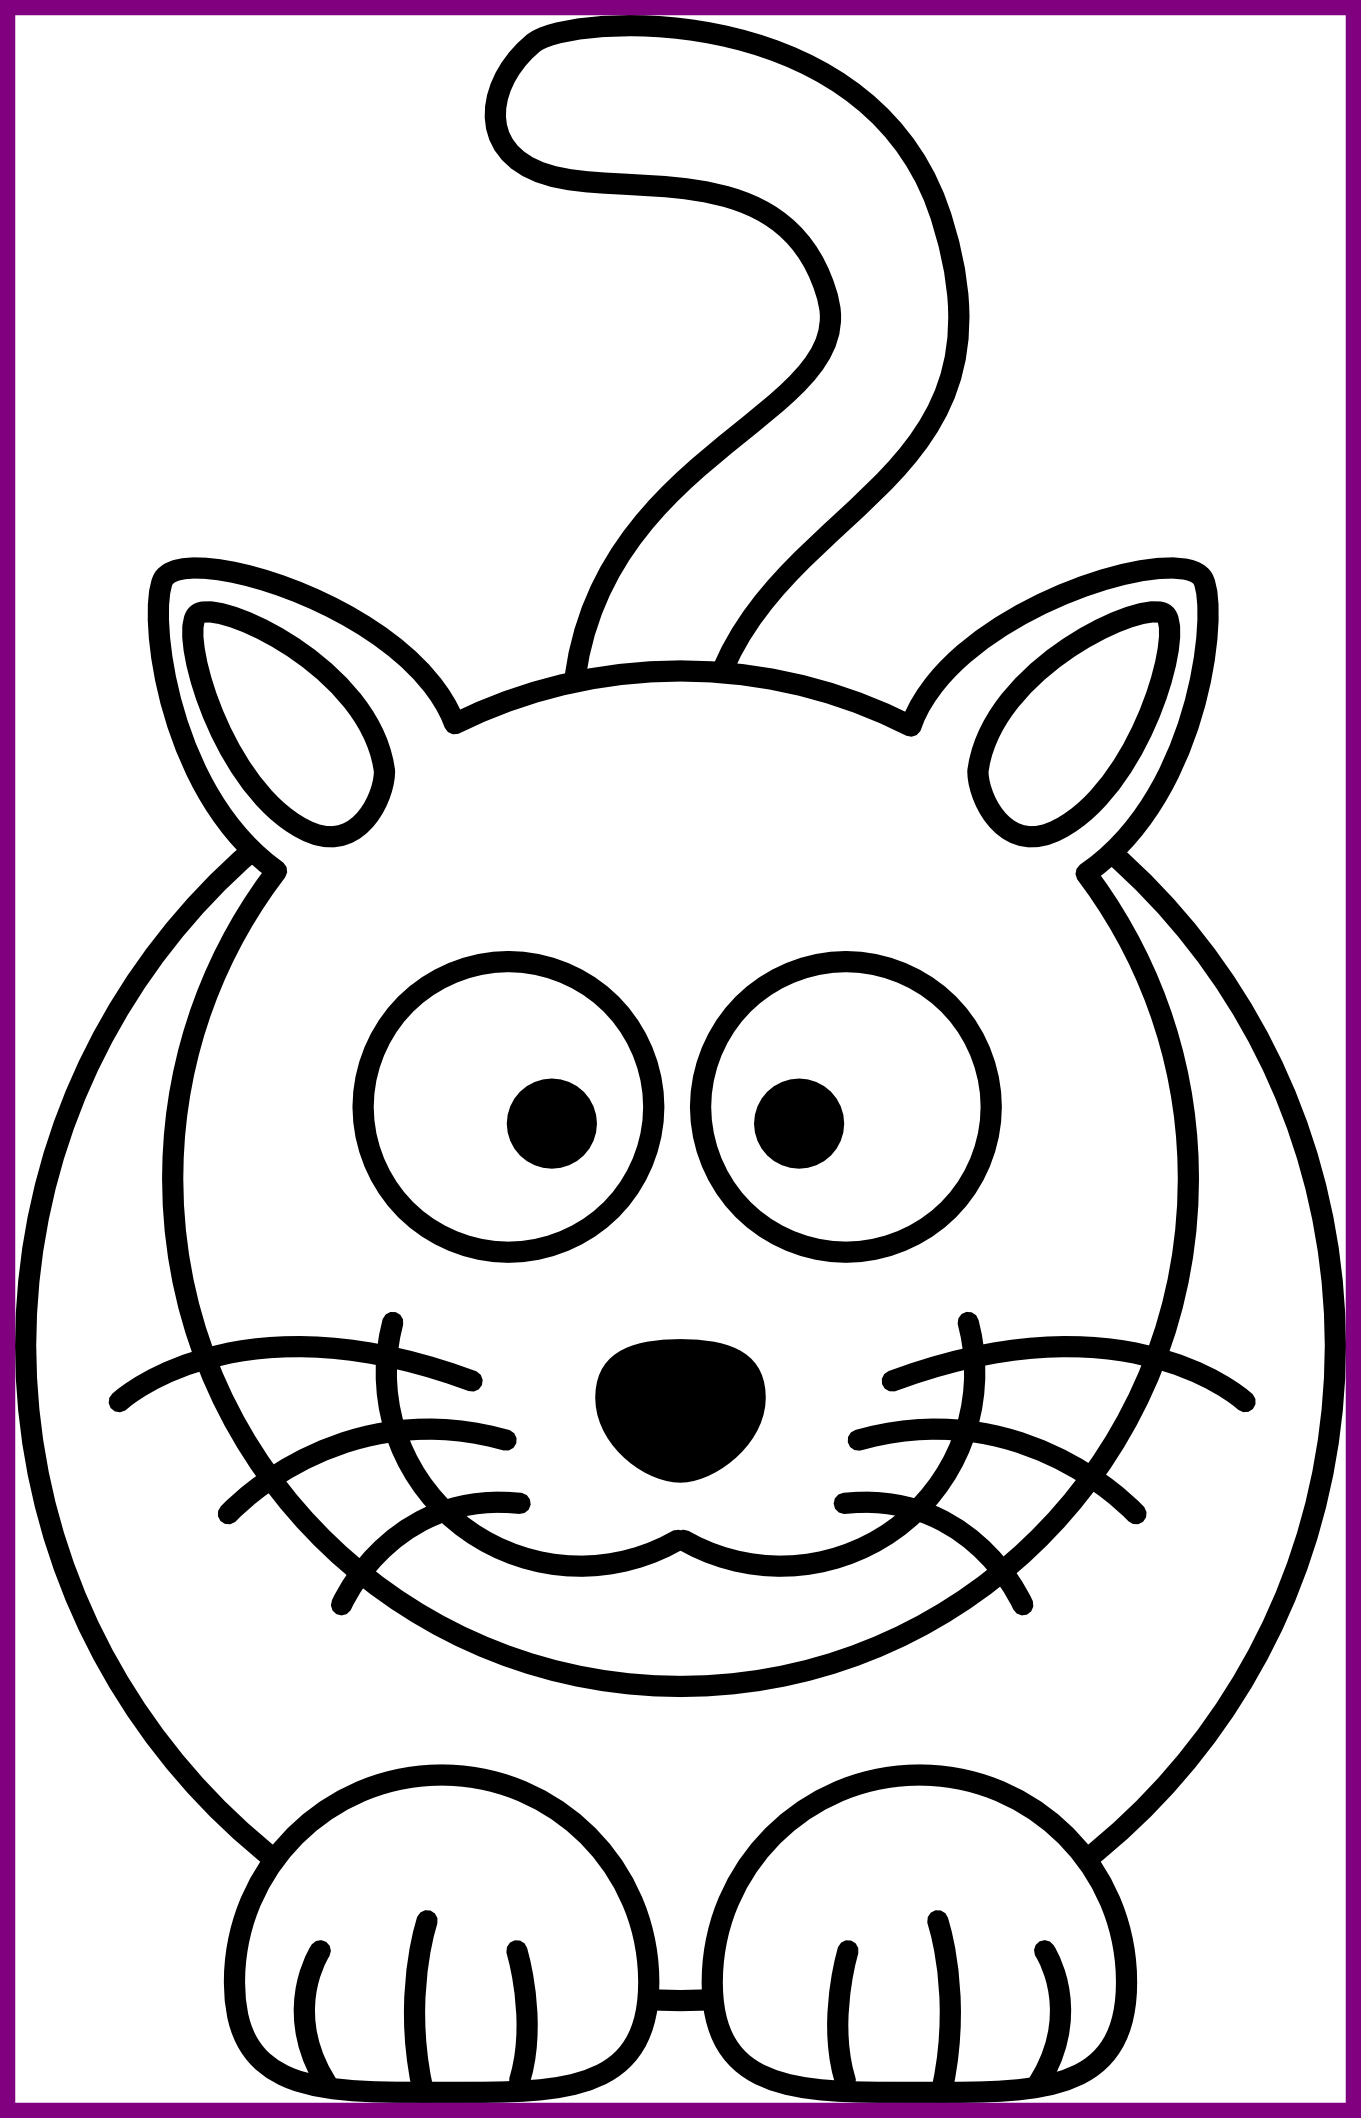 Best Cat Face Clipart Black And White Pic Of Kitten - Best Cat Face Clipart Black And White Pic Of Kitten (1361x2118)